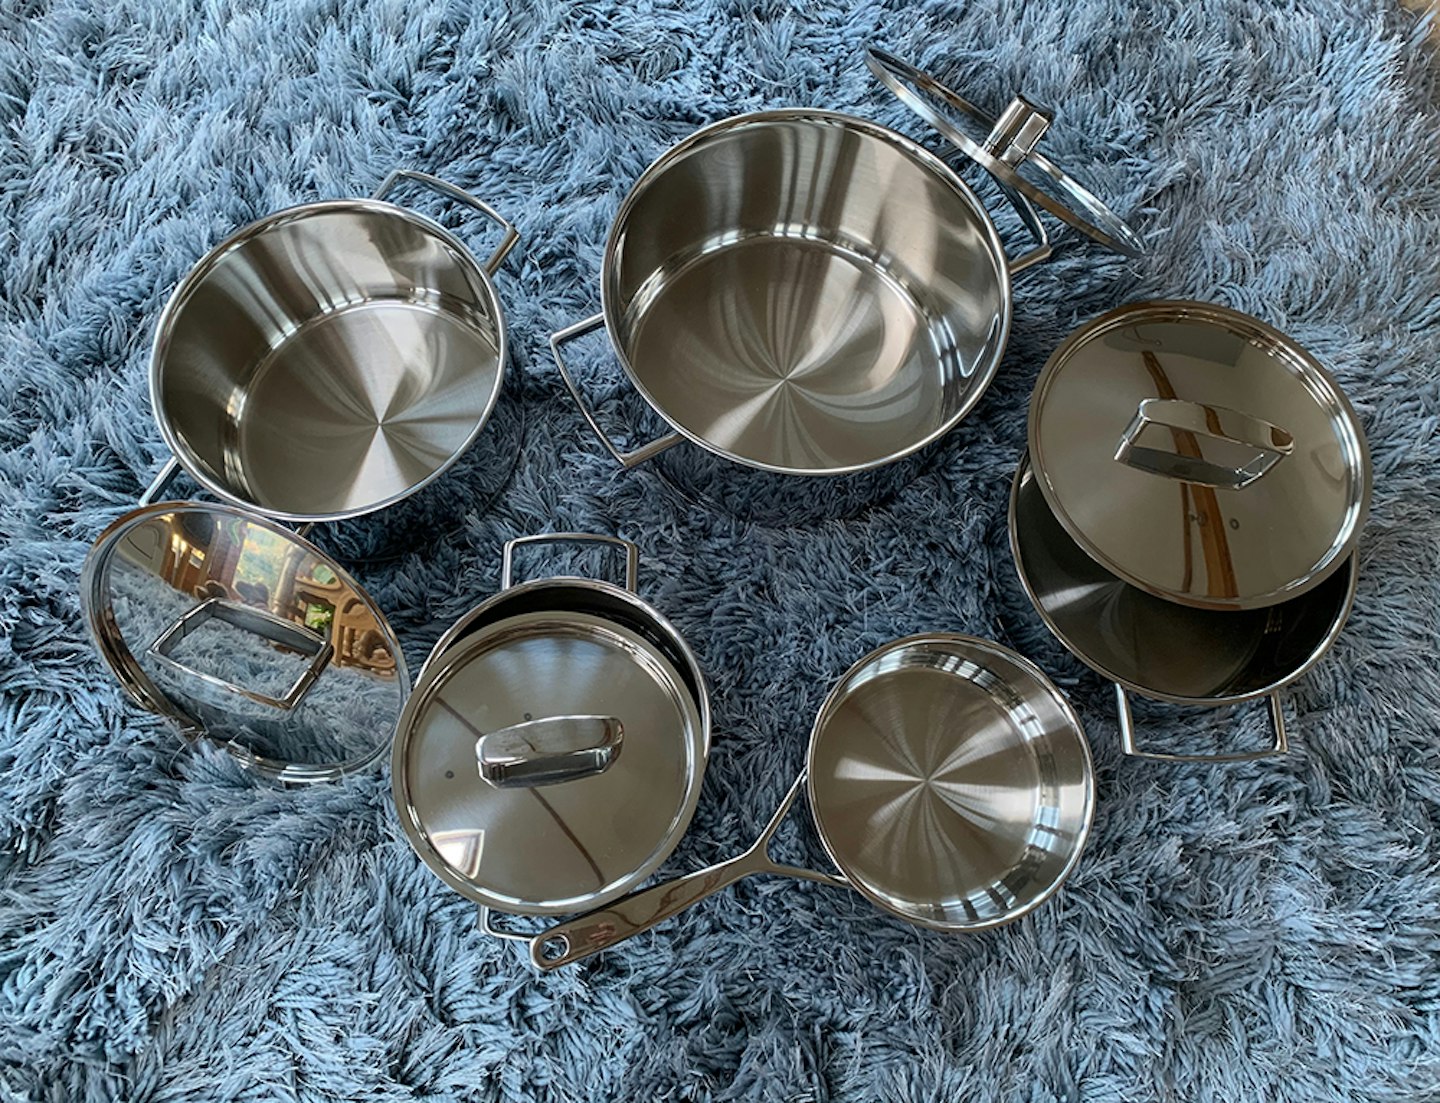 Zwilling pots and pans set